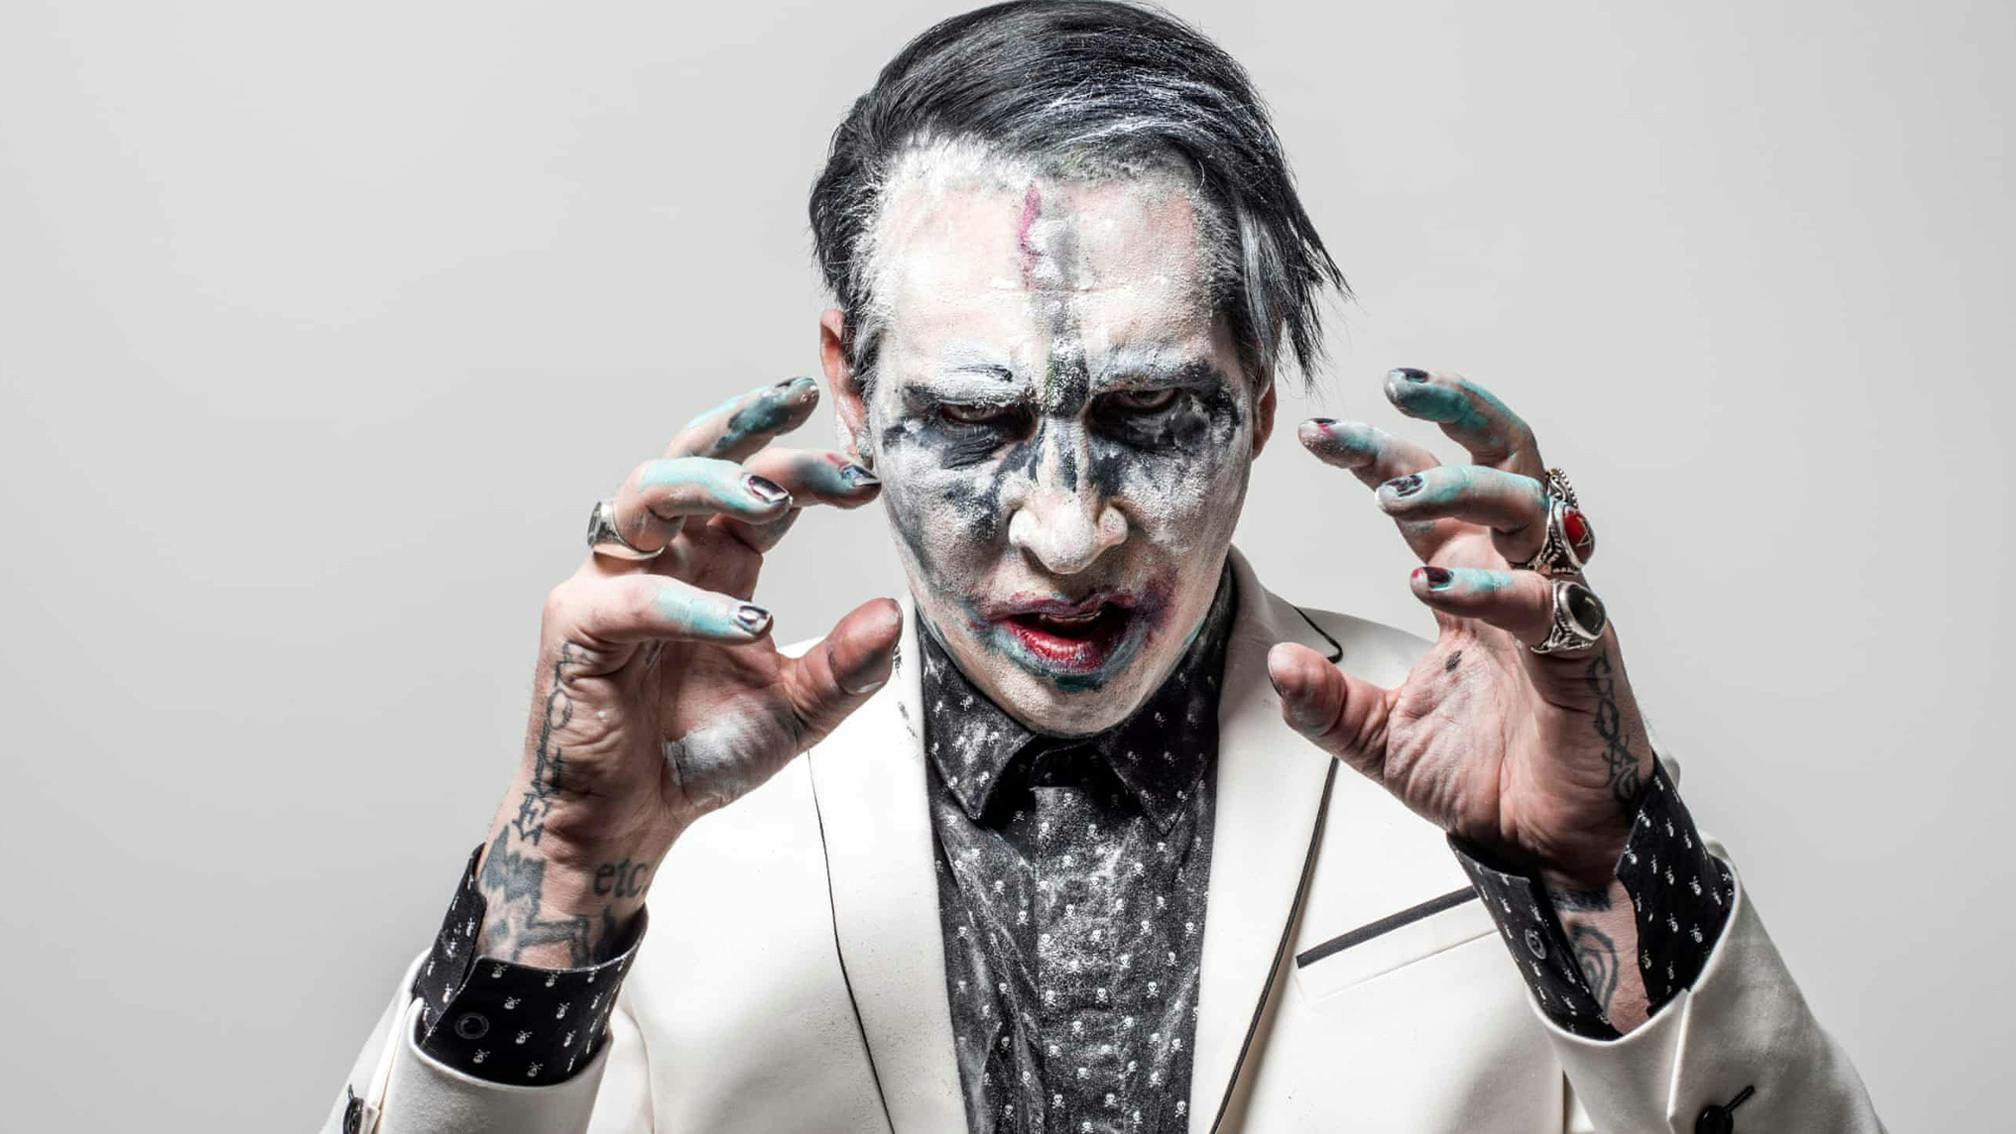 Marilyn Manson Is Asking Fans To "Prepare" For Something